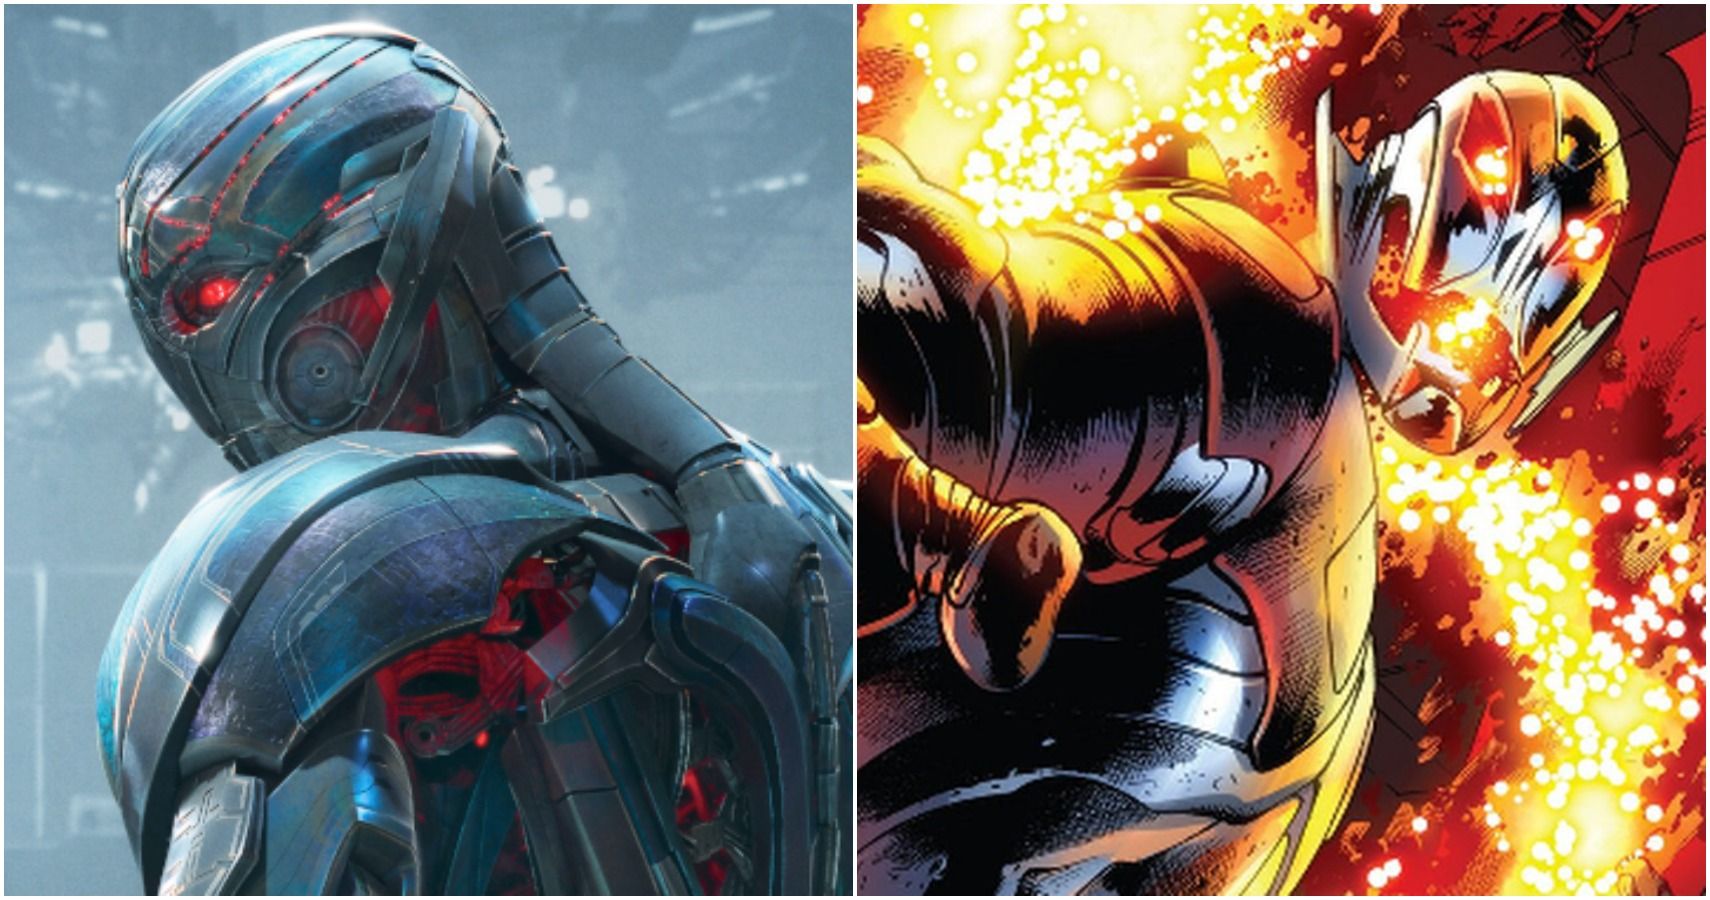 Ultron 10 Differences Between The Mcu Version The Marvel Comics Version